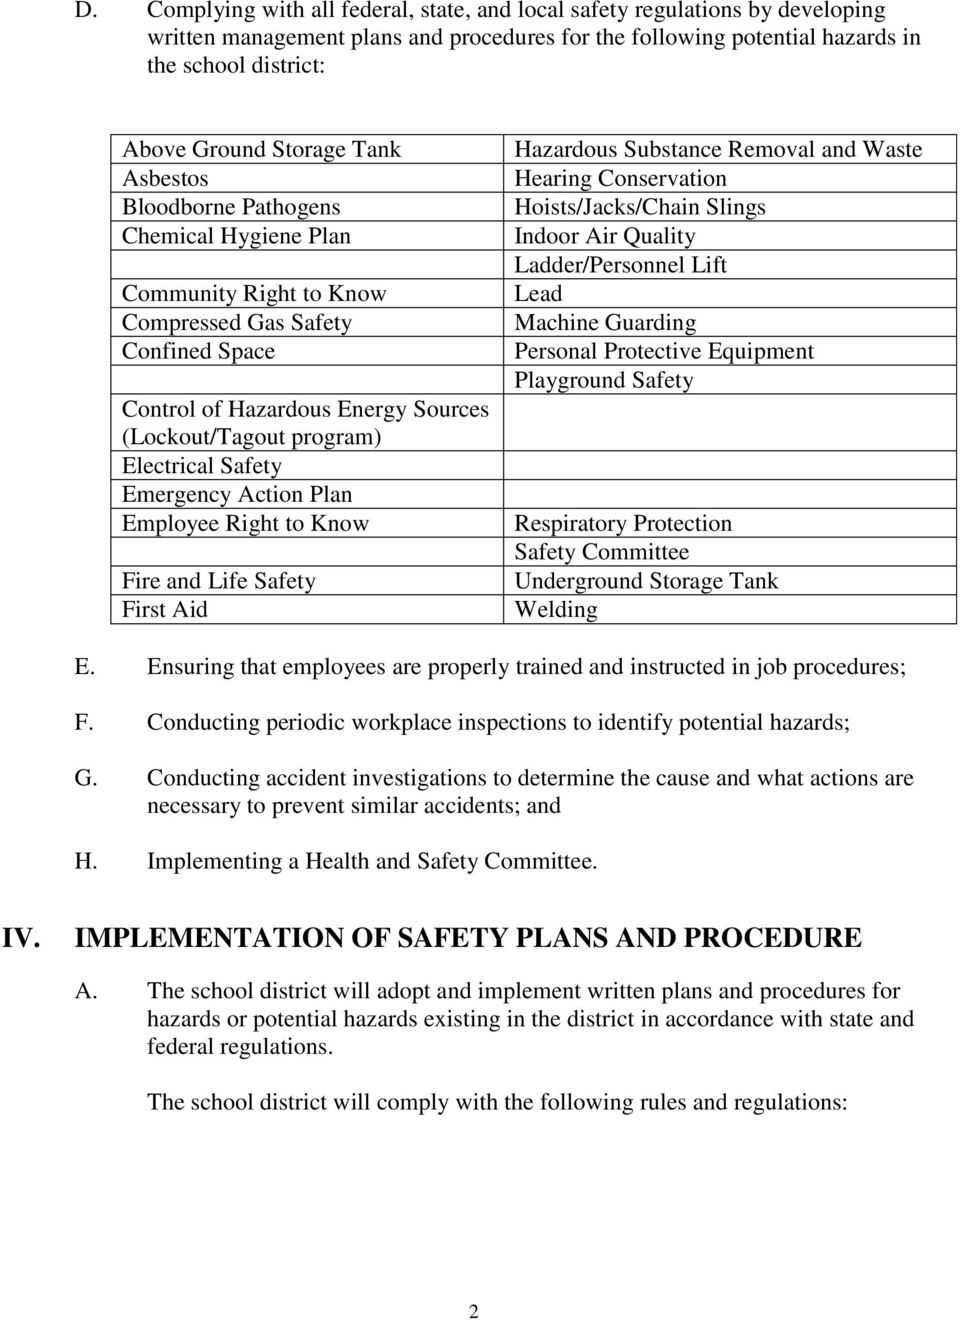 Safety Emergency Action Plan Employee Right to Know Fire and Life Safety First Aid Hazardous Substance Removal and Waste Hearing Conservation Hoists/Jacks/Chain Slings Indoor Air Quality